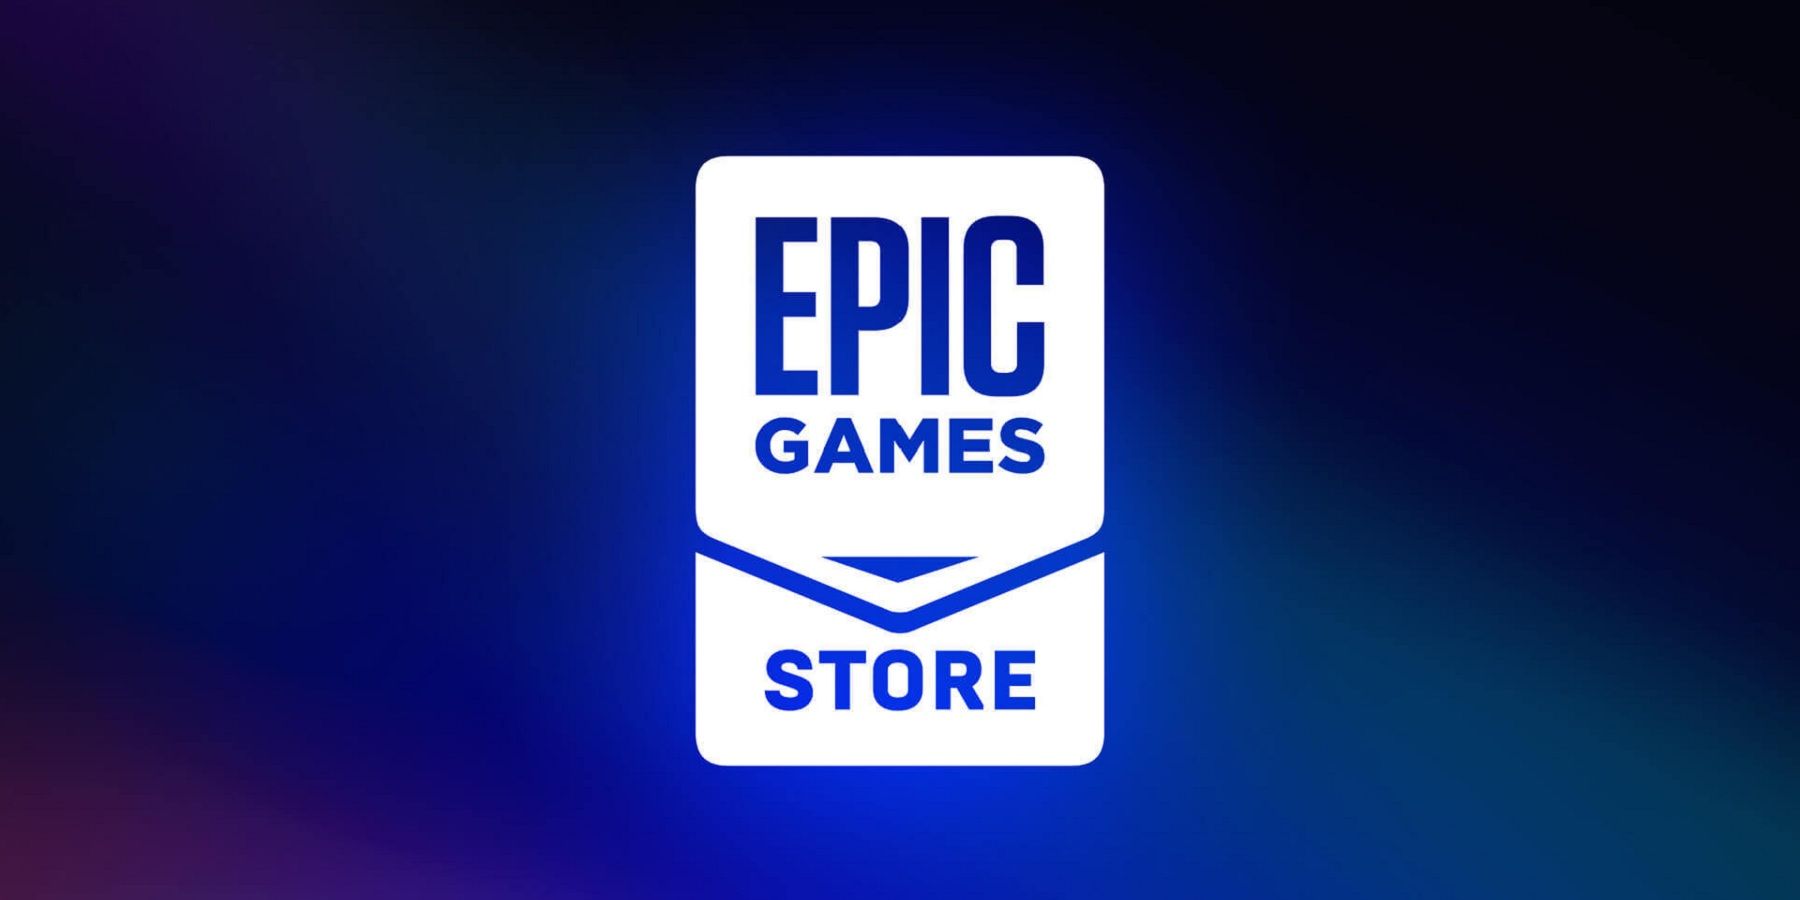 Epic Games Store Reveals Free Game for September 14